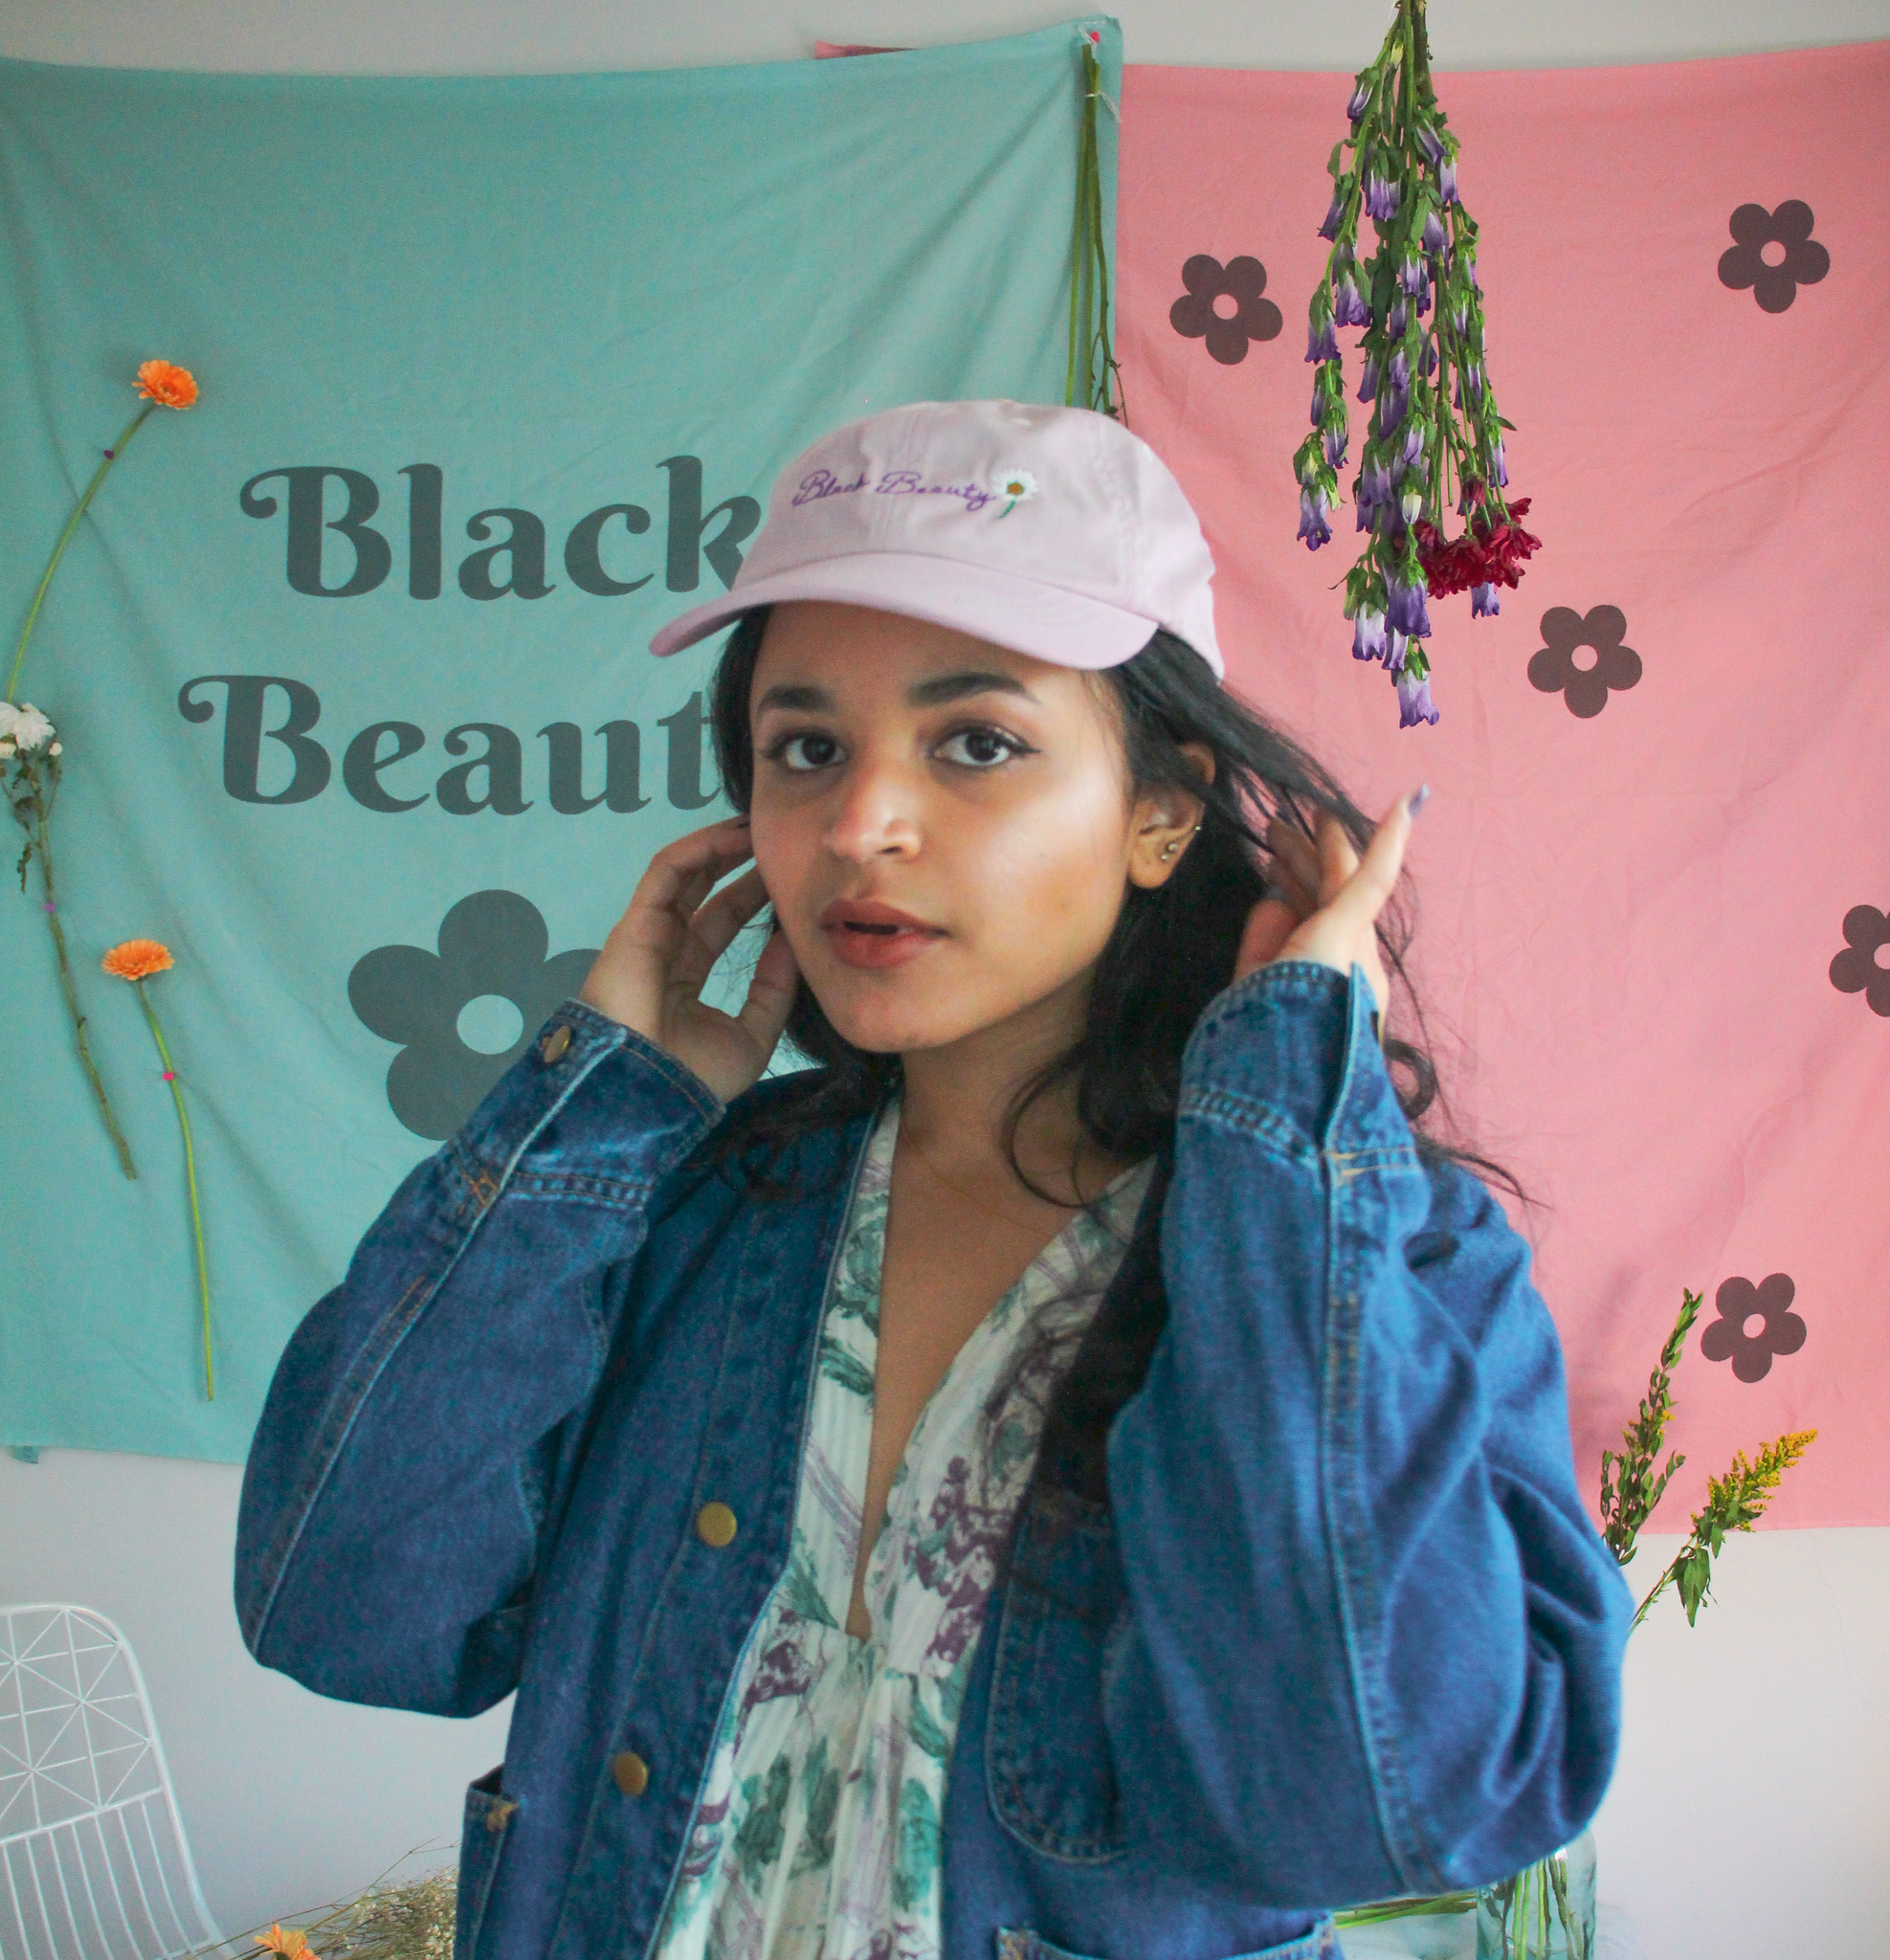 A woman posing in front of green and pink wall tapestries while wearing a lavender baseball cap with embroidered text on it that reads "Black Beauty"